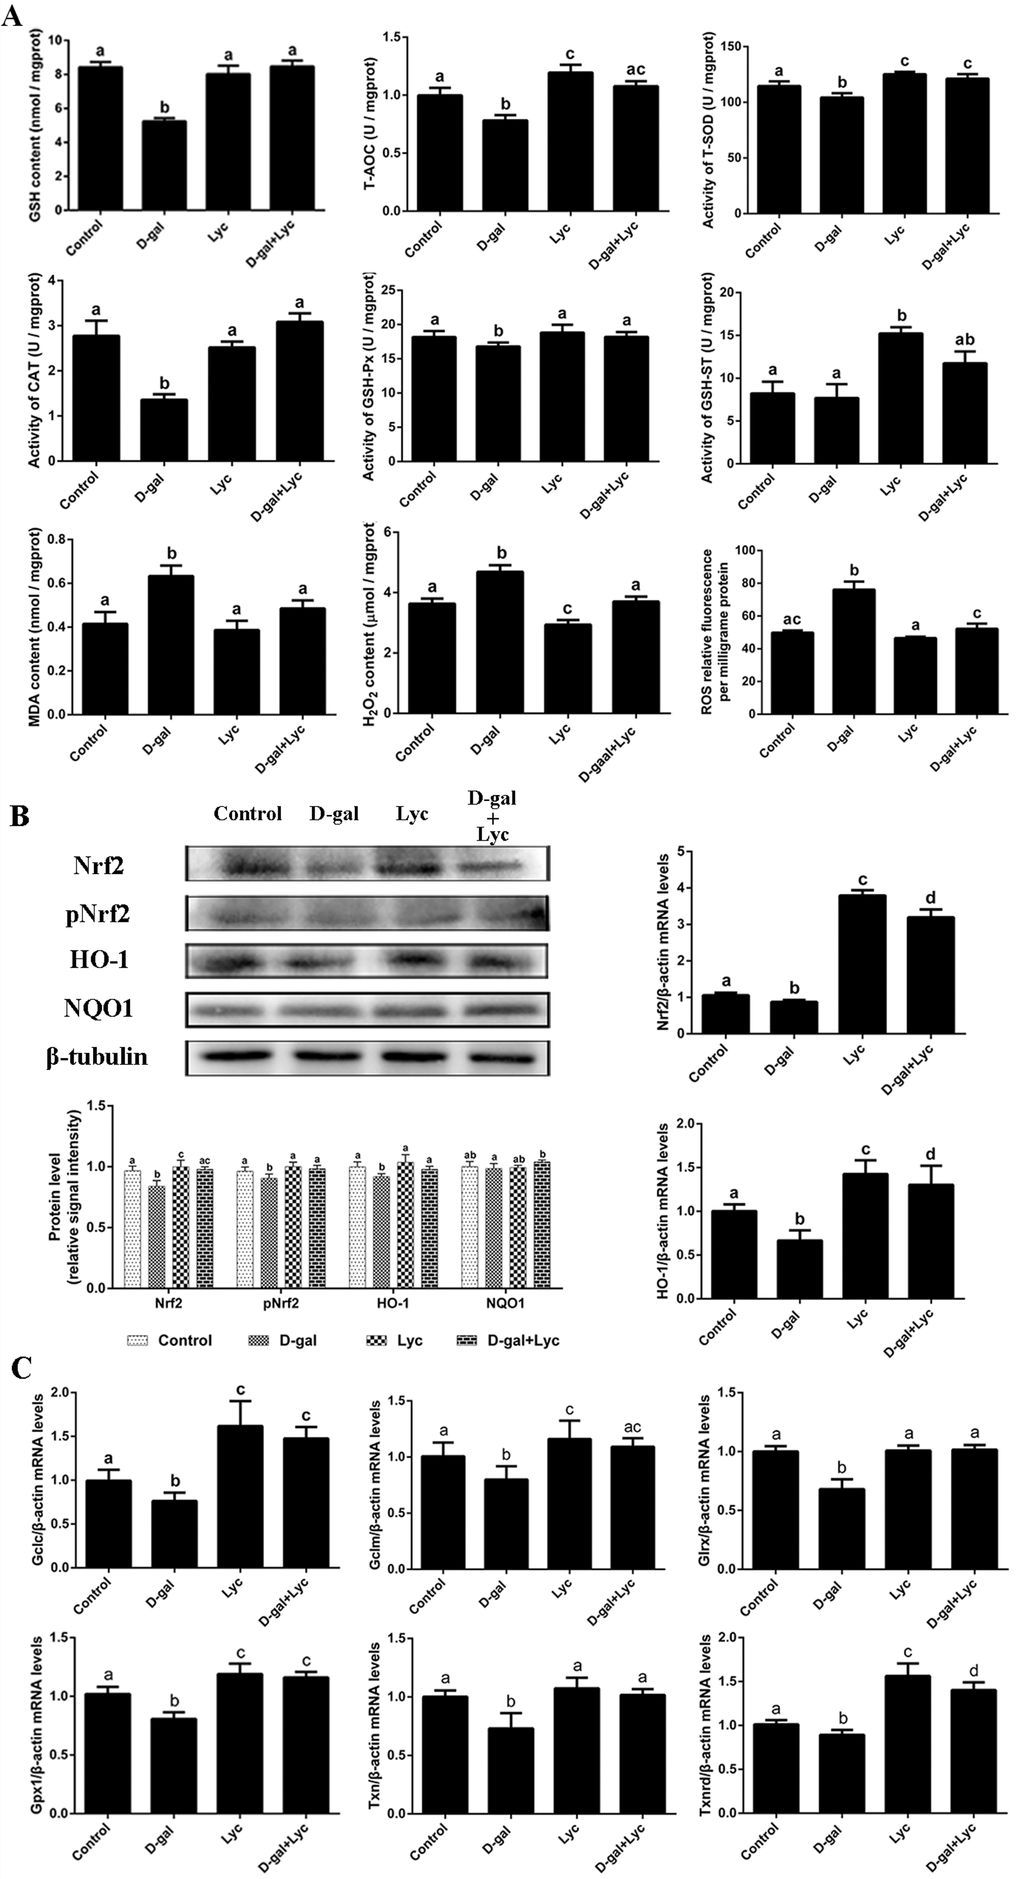 Effects of lycopene on decreased antioxidant status in D-gal-induced aged ovarian tissues and the activities of Nrf2/HO-1 pathway. (A) Effect of lycopene on decreased antioxidants status in the D-gal-induced aged ovarian tissues. (B) Effect of lycopene on the down-regulated expression of Nrf2, pNrf2 and HO-1, and the mRNA abundance of Nrf2 and HO-1. (C) Effect of lycopene on down-regulated mRNA abundance of Nrf2/HO-1 downstream genes. Values are expressed as the means±s.e.. Different lowercase letters indicate significant differences (P 